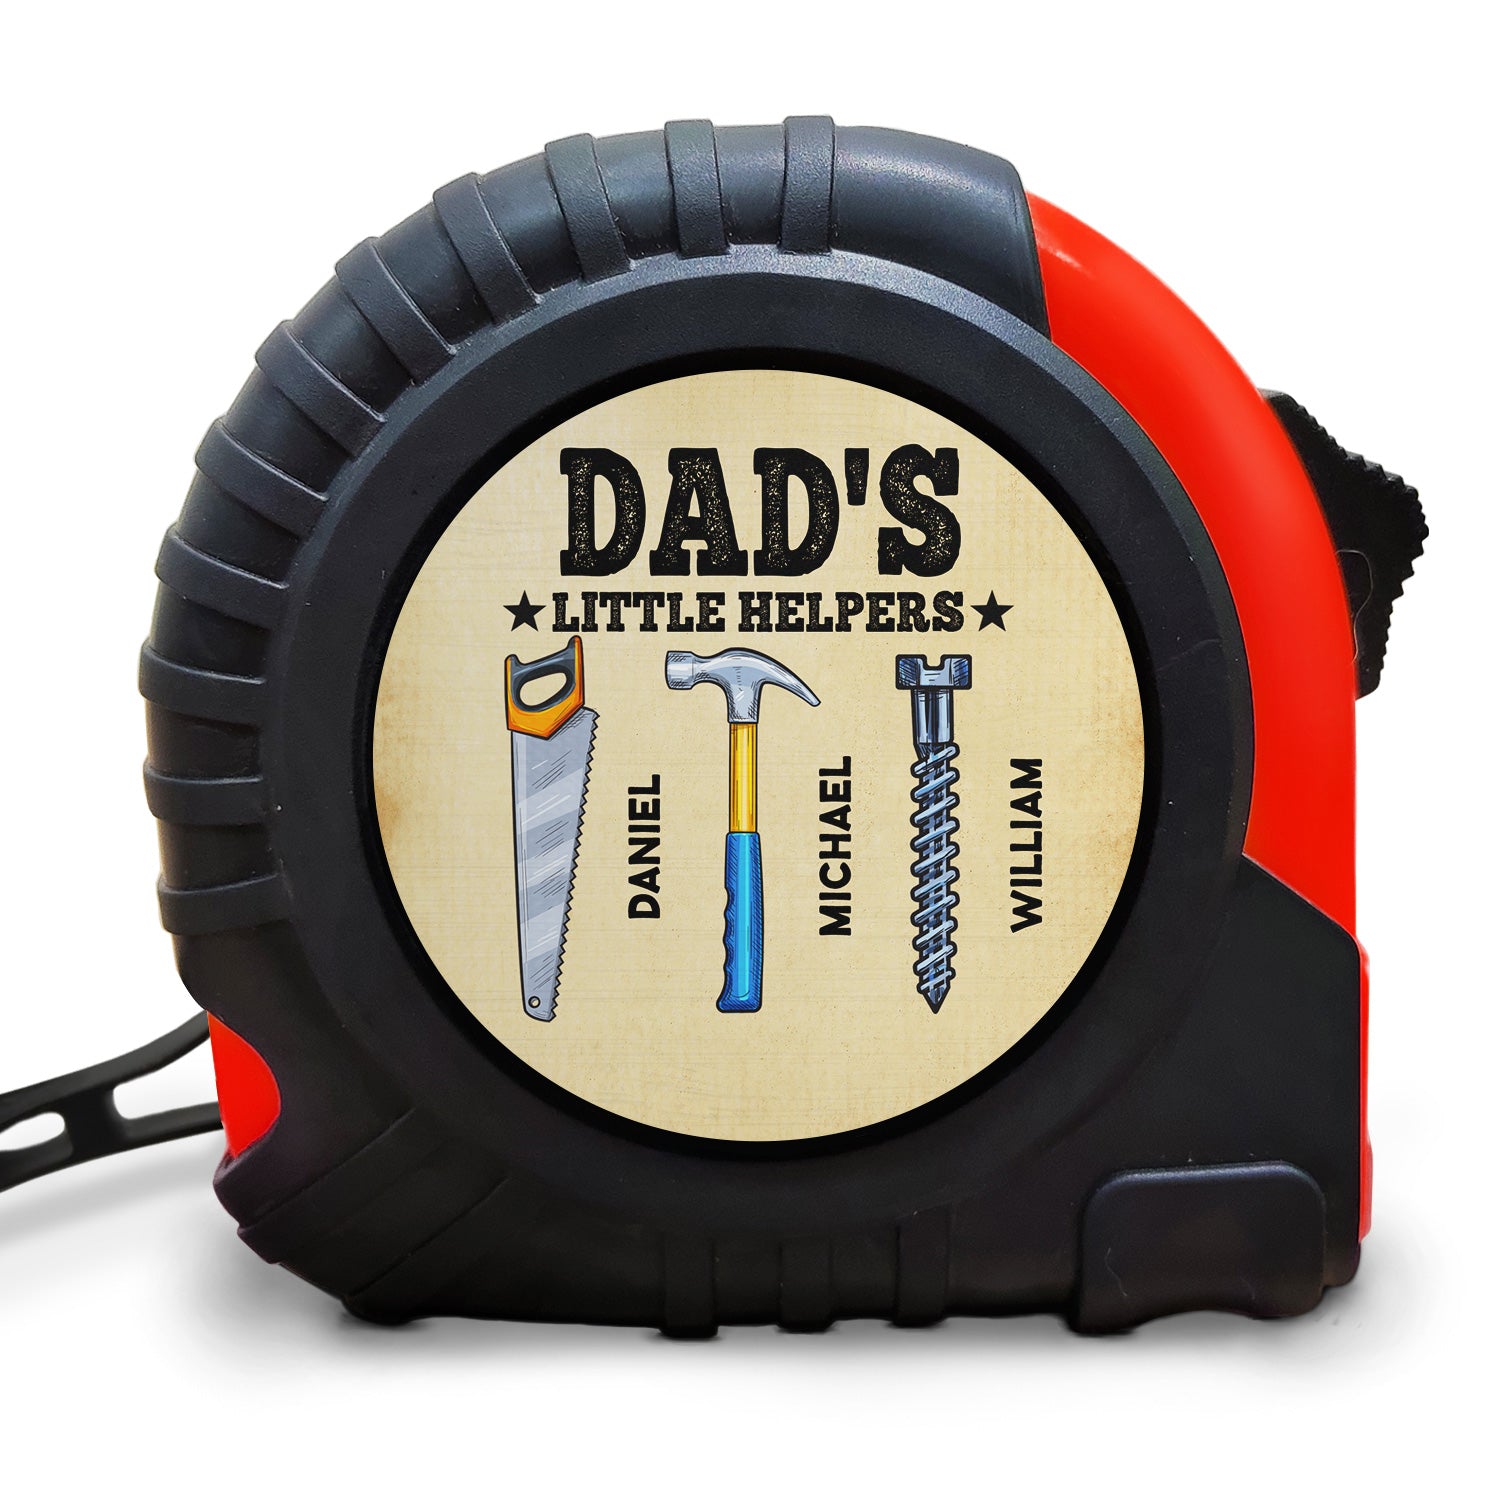 Dad's Little Helpers - Gift For Father, Grandpa, Grandfather - Personalized Tape Measure